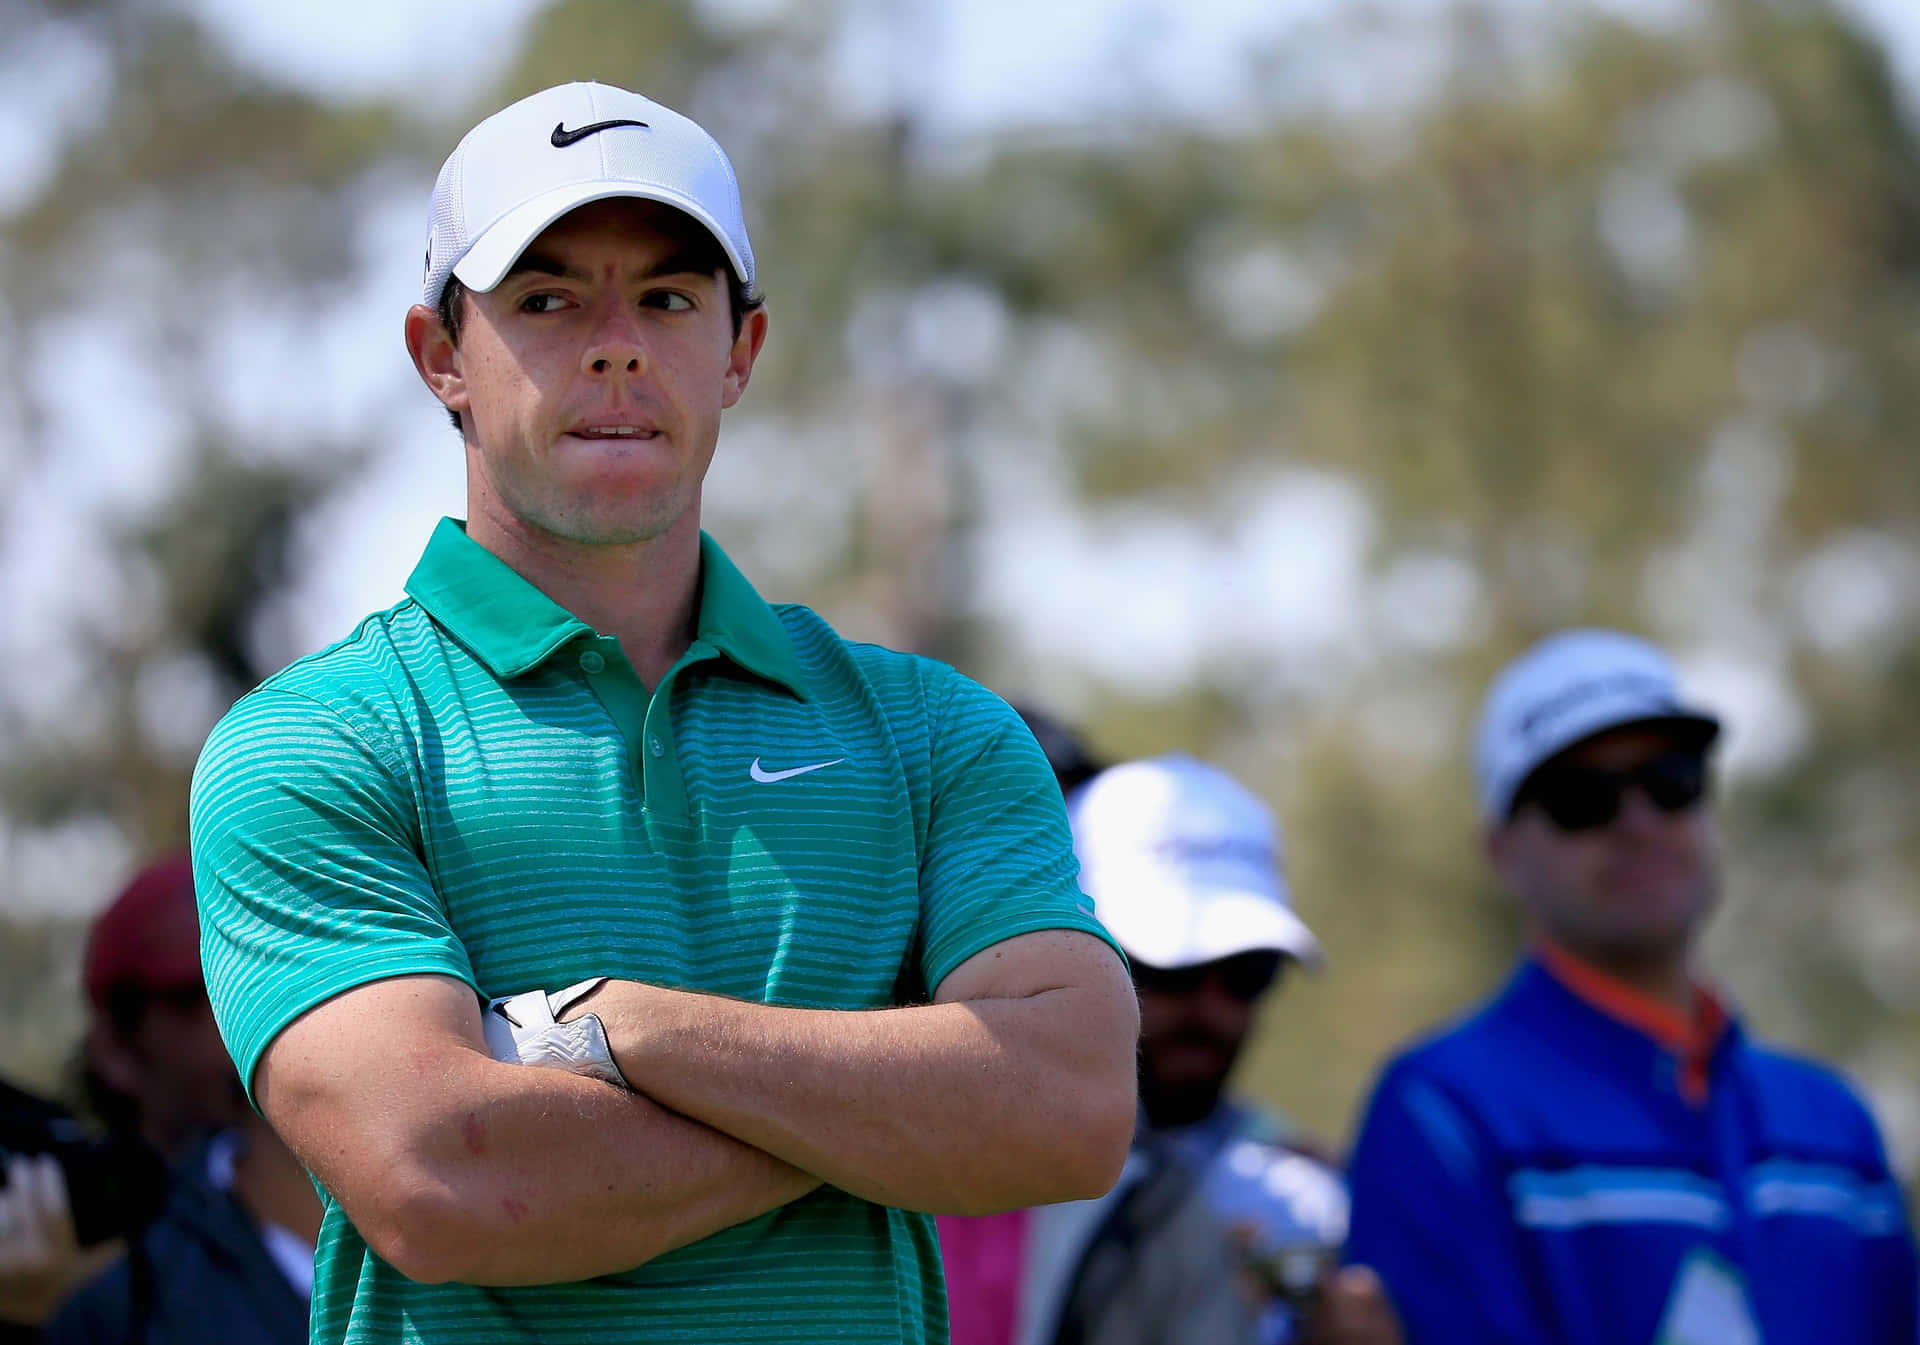 Rory McIlroy confidently poses in his golf tournament gear Wallpaper